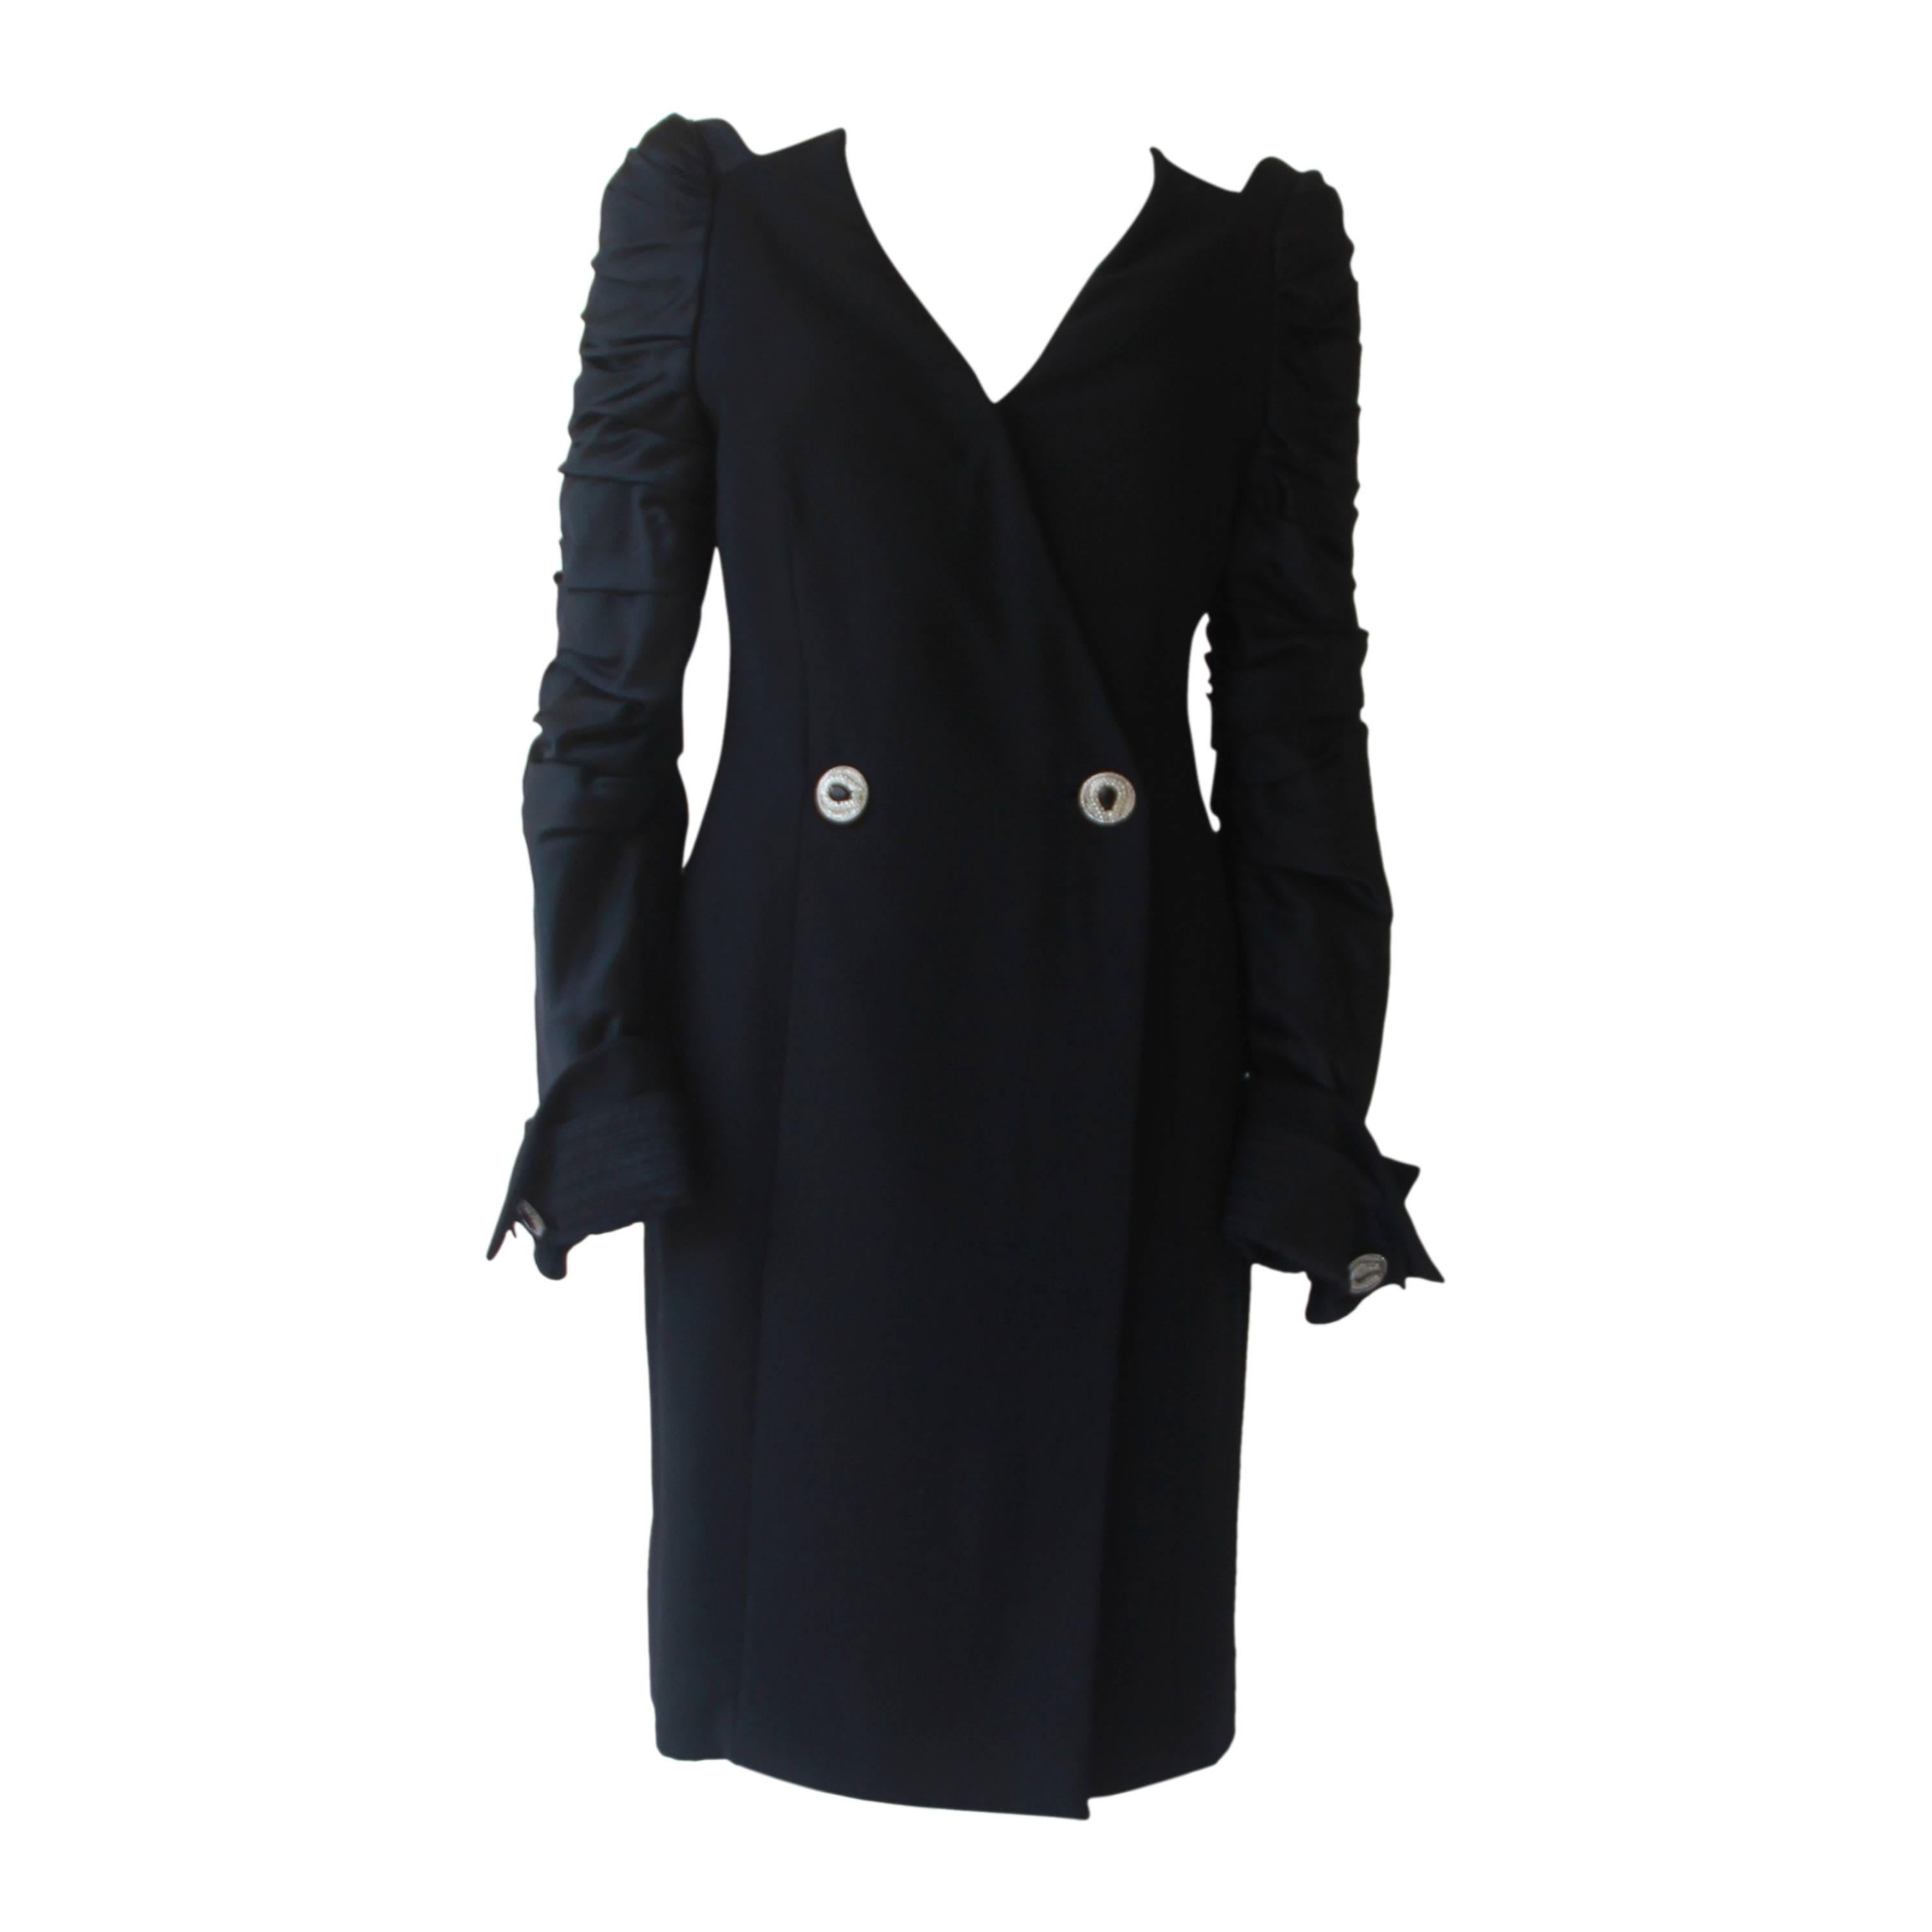 Important Gianni Versace Cocktail Coat Dress Fall 1990 For Sale